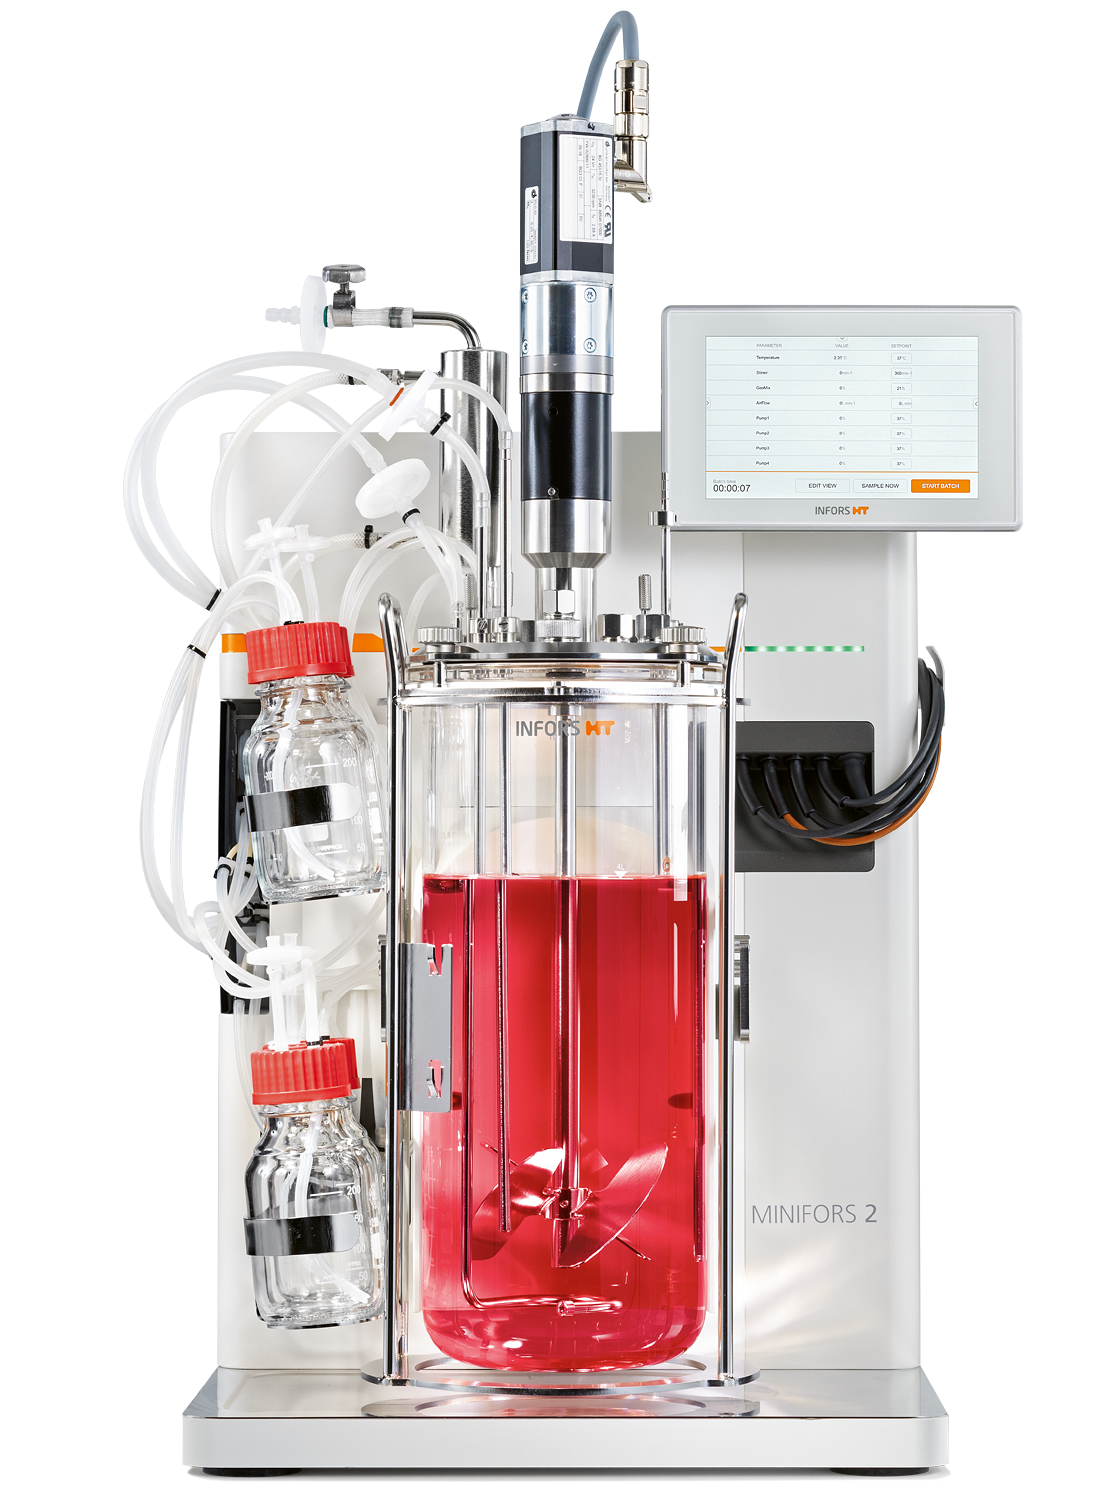 Minifors 2 bench-top bioreactor now also for cell cultures  06. May 2019